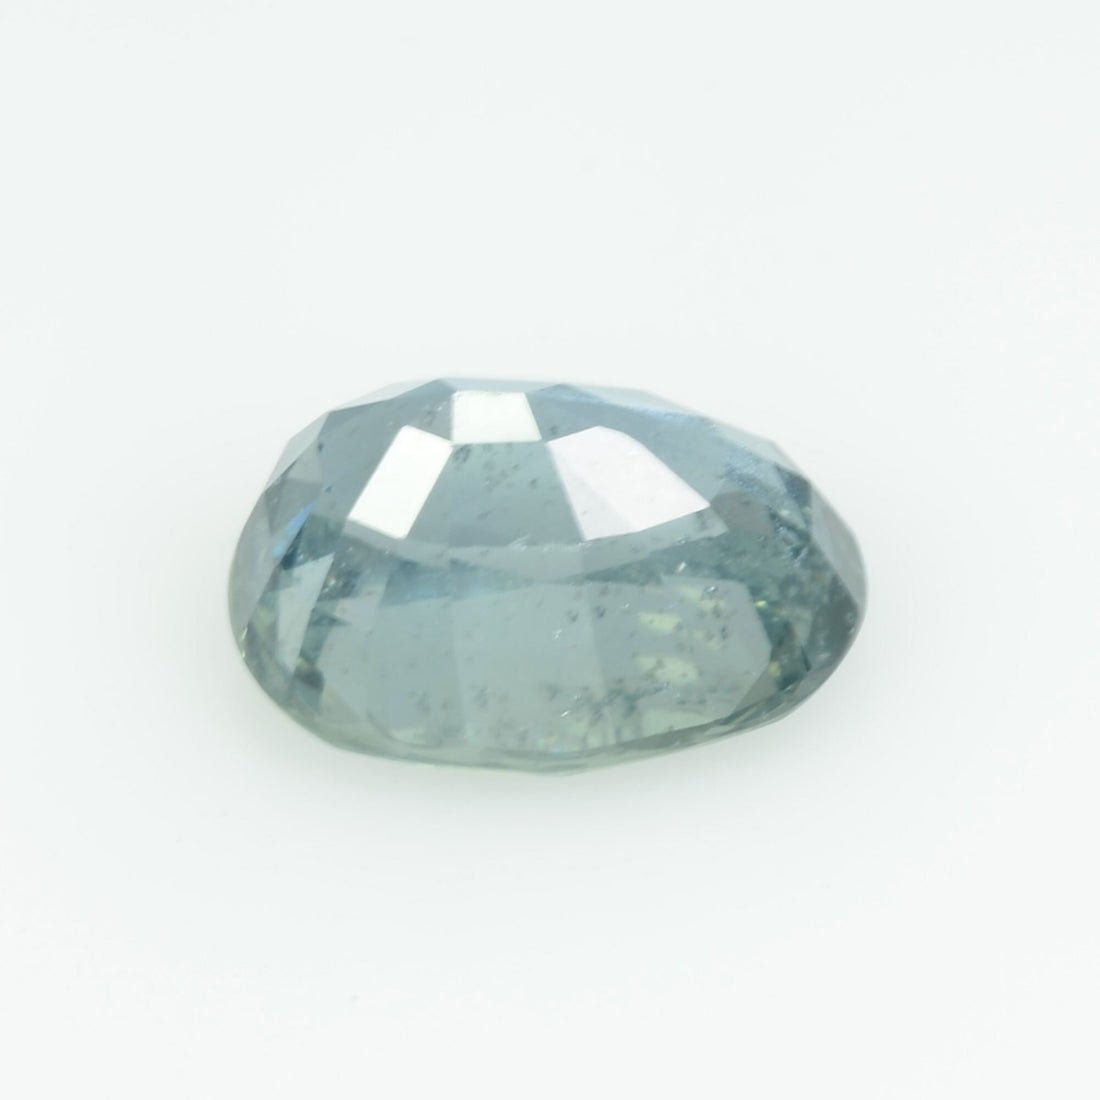 4.58 Cts Natural Fancy Blue Sapphire Loose Gemstone Oval Cut